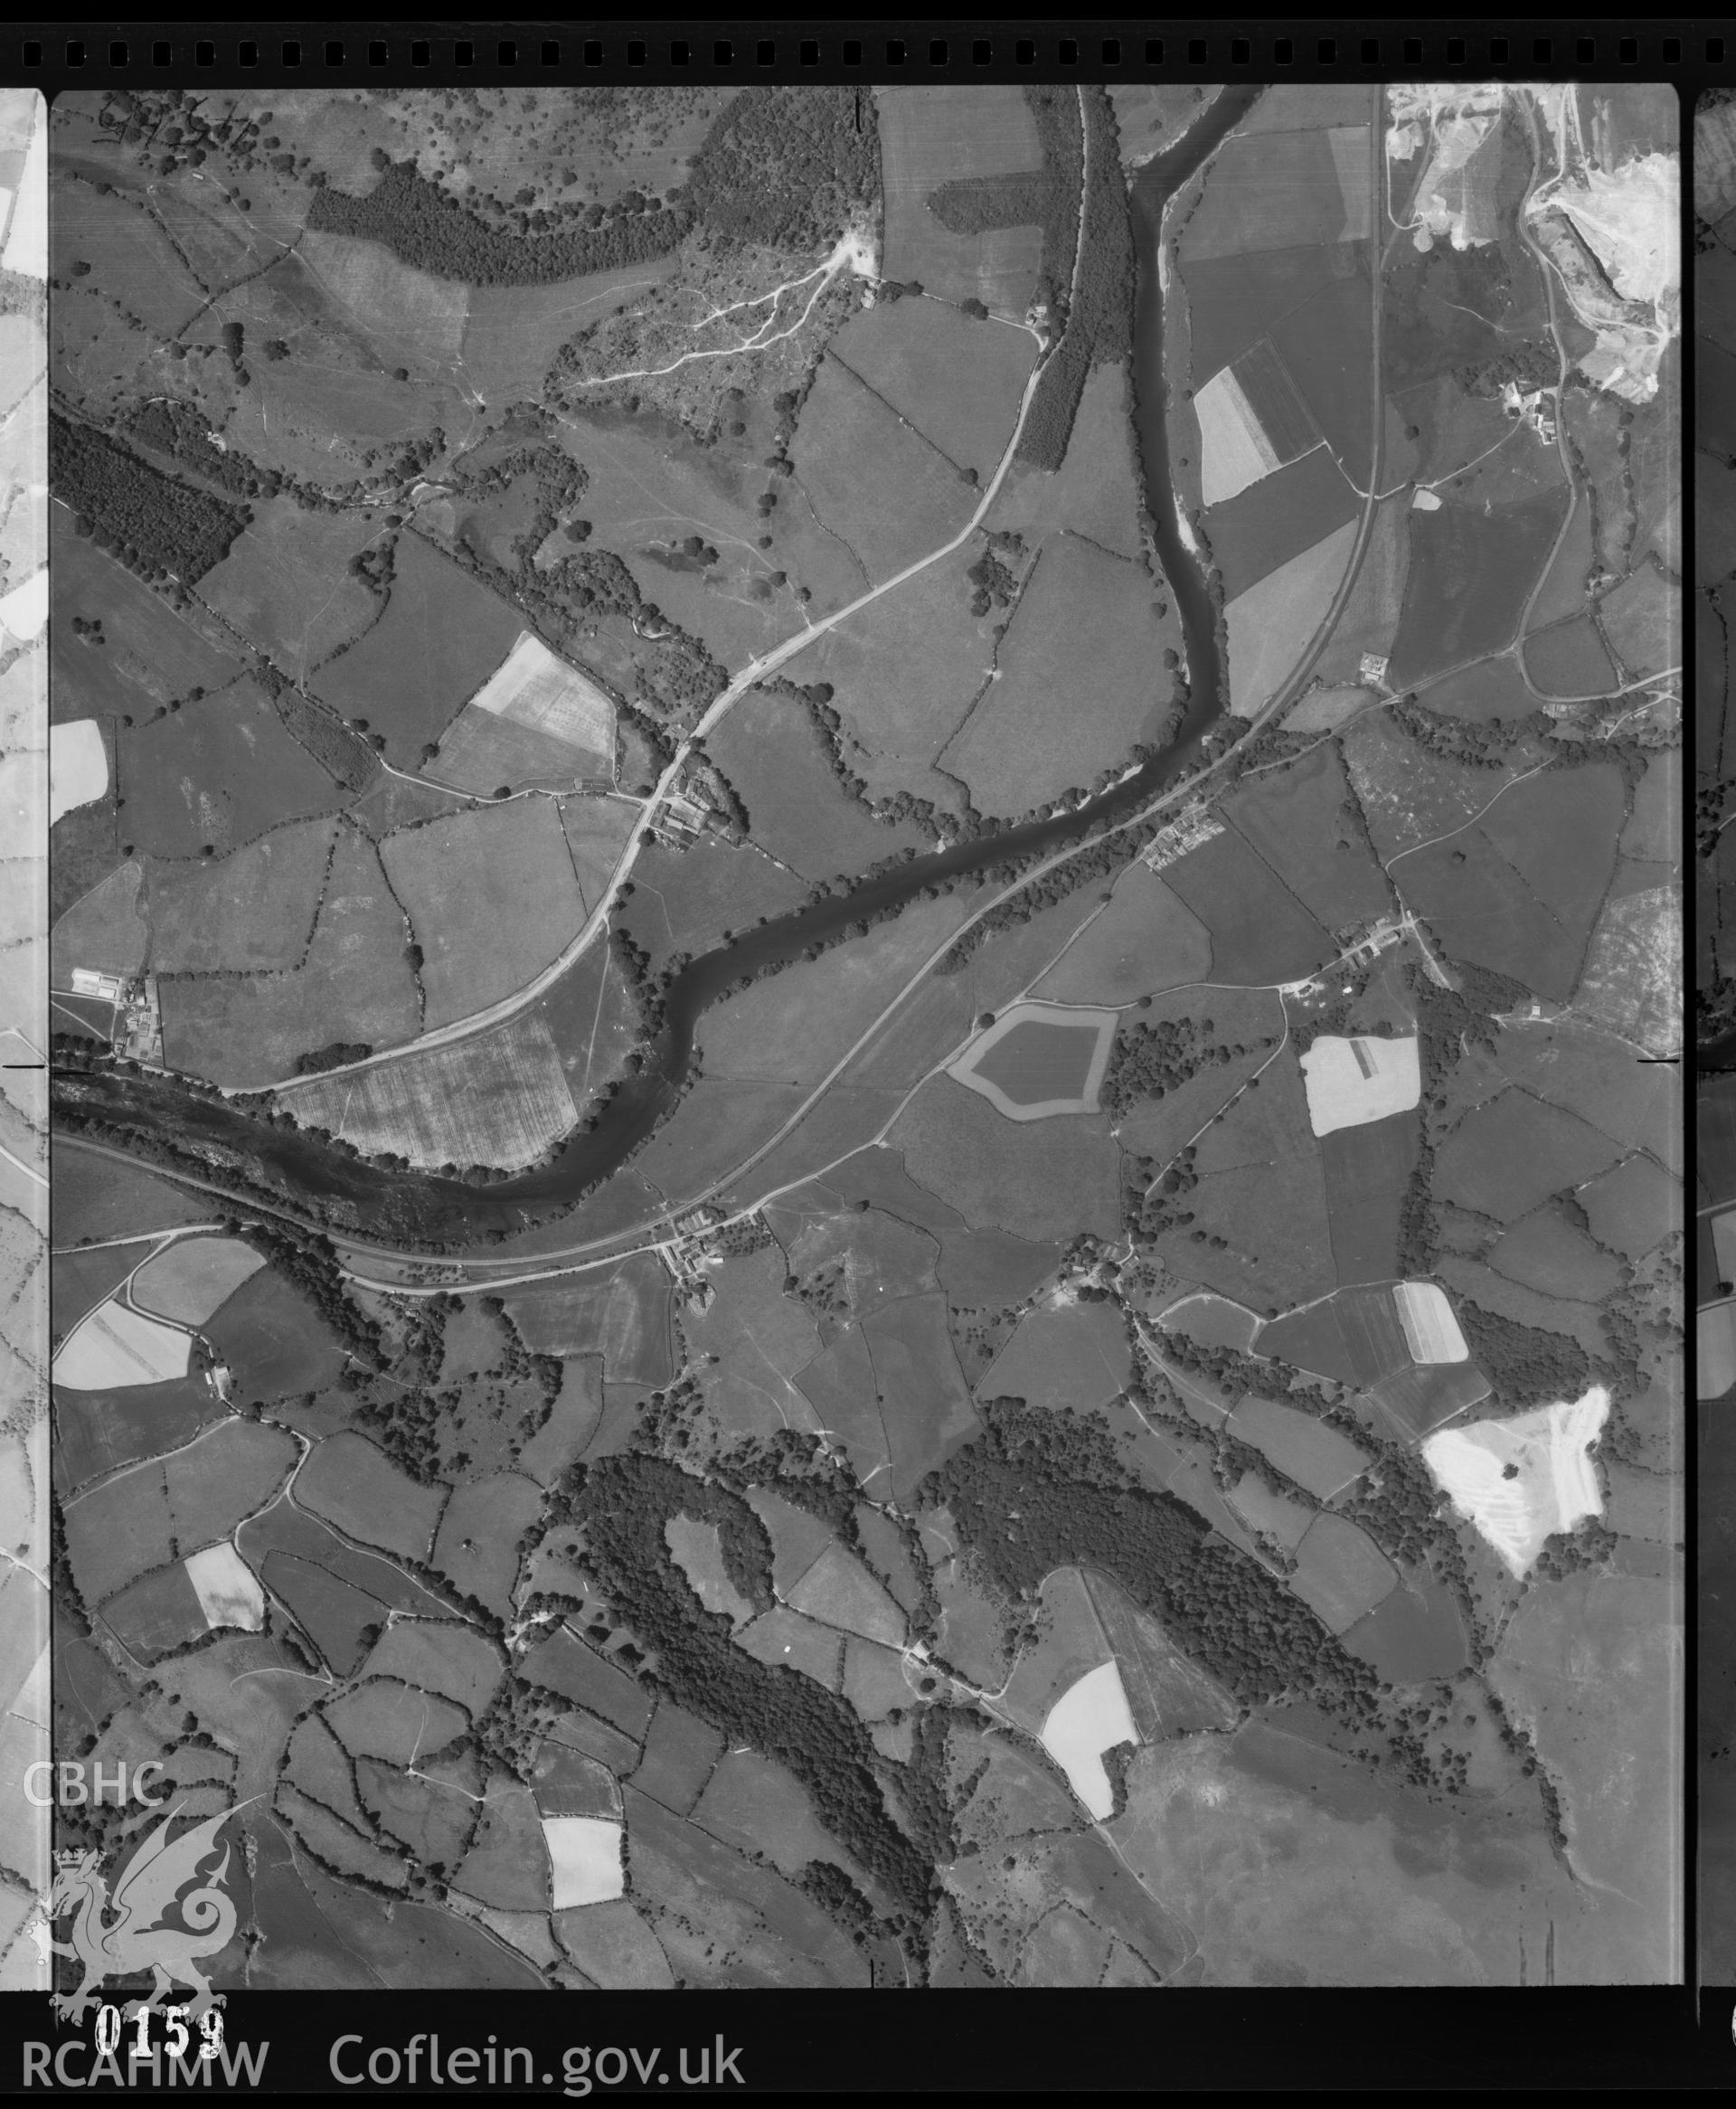 Digital copy of a black and white vertical aerial photograph taken by the RAF centred on SO0550 at a scale of 1:10000. The photograph includes part of Builth Wells community in Powys.